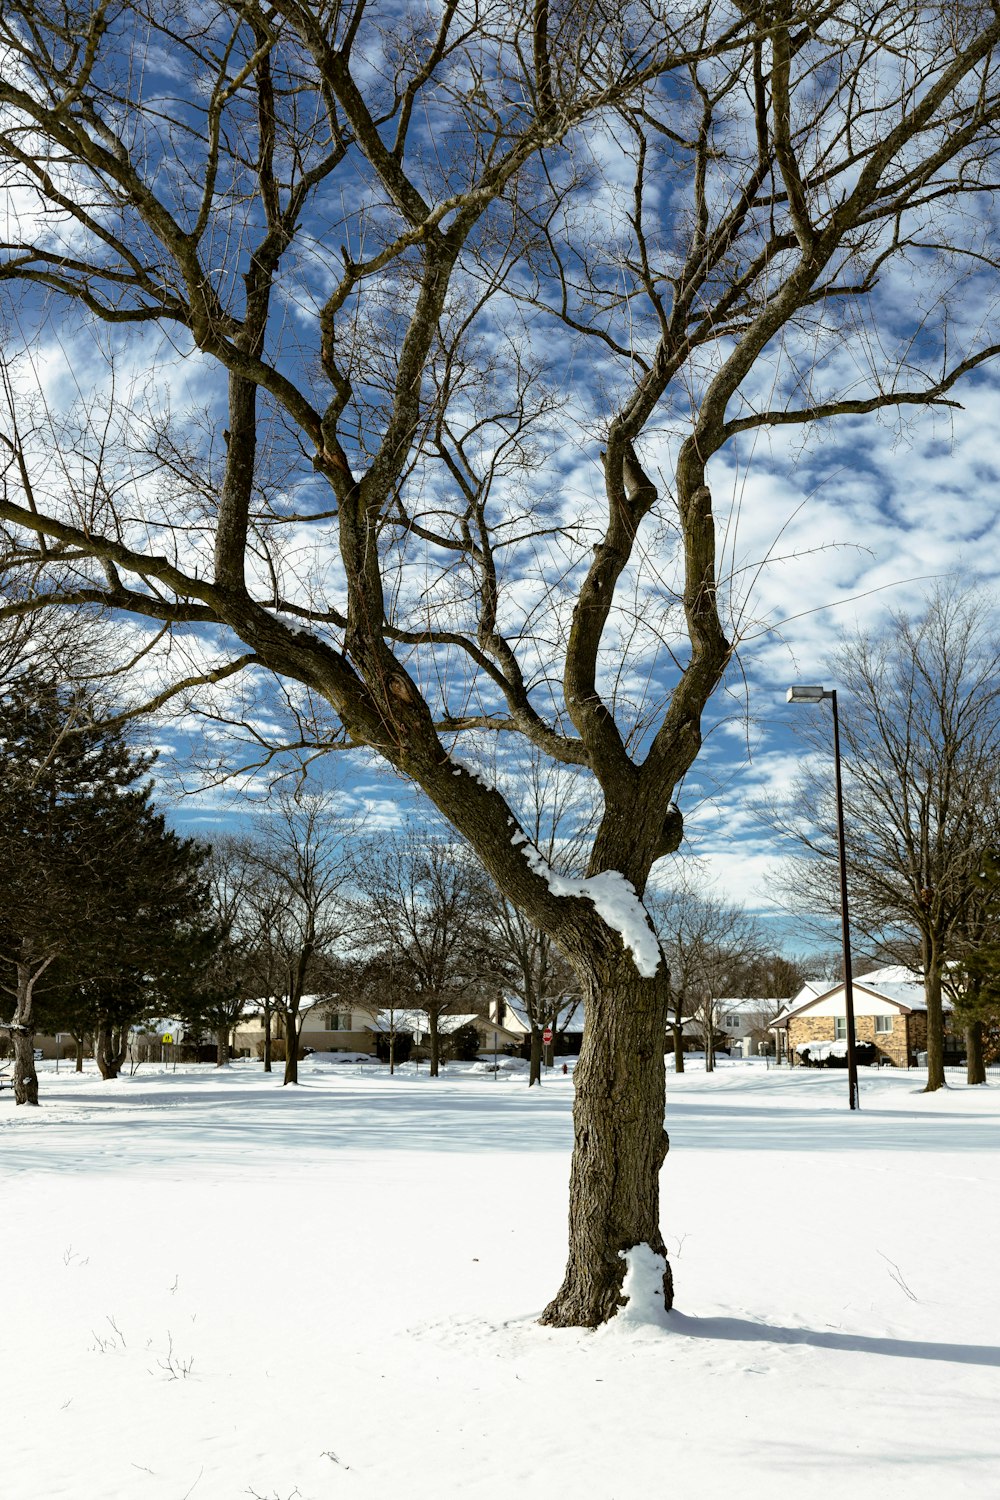 a snow covered park with a tree in the foreground